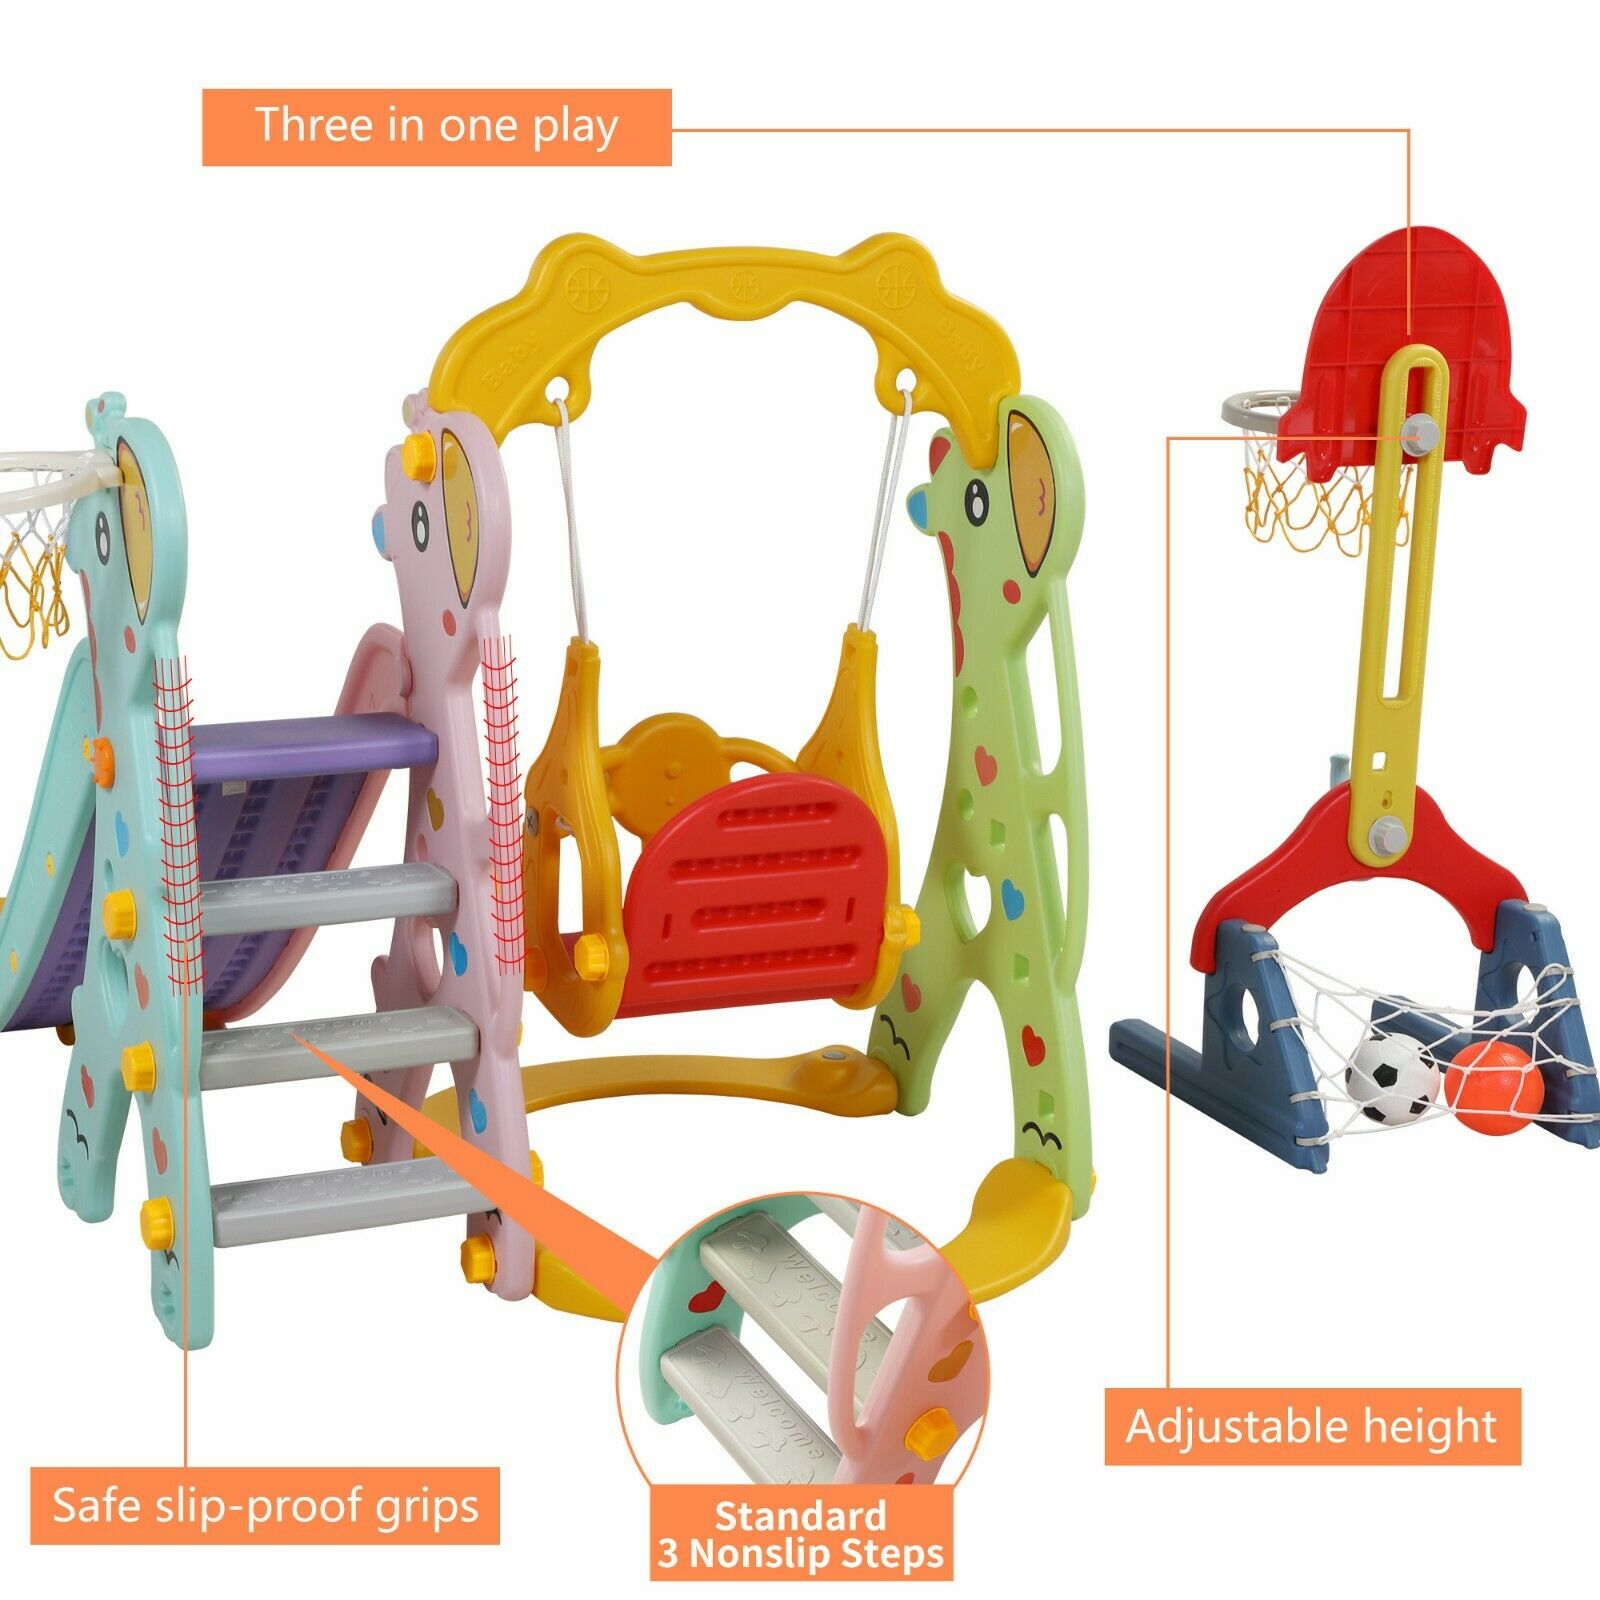 5 in 1 Toddler Slide and Swing Set, Kids Climber Activity Center Playset Outdoor